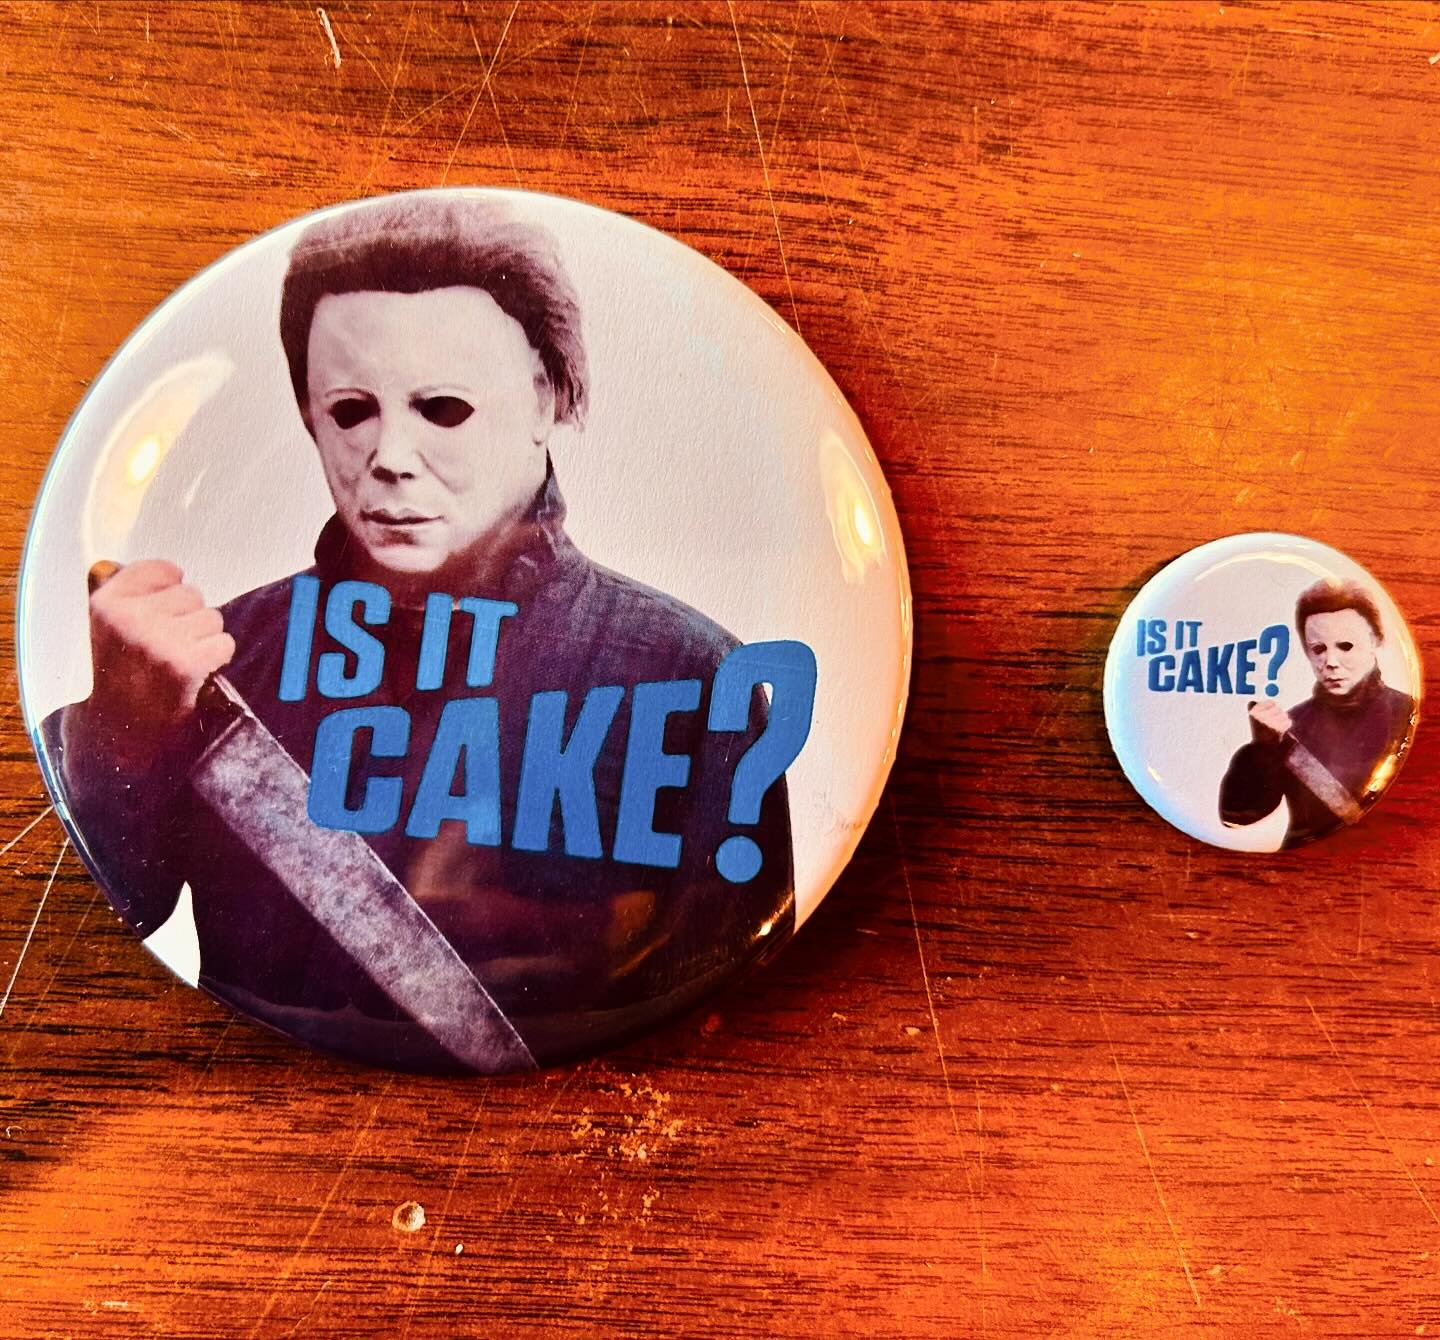 New&ldquo;Is It Cake?&rdquo; buttons! &ldquo;TOTALLY OFFICIAL&rdquo; Available in 1.25&rdquo; and 3.5&rdquo; pins and magnets. Thanks Netflix!
#fatrabbitky #isitcake #michaelmyers